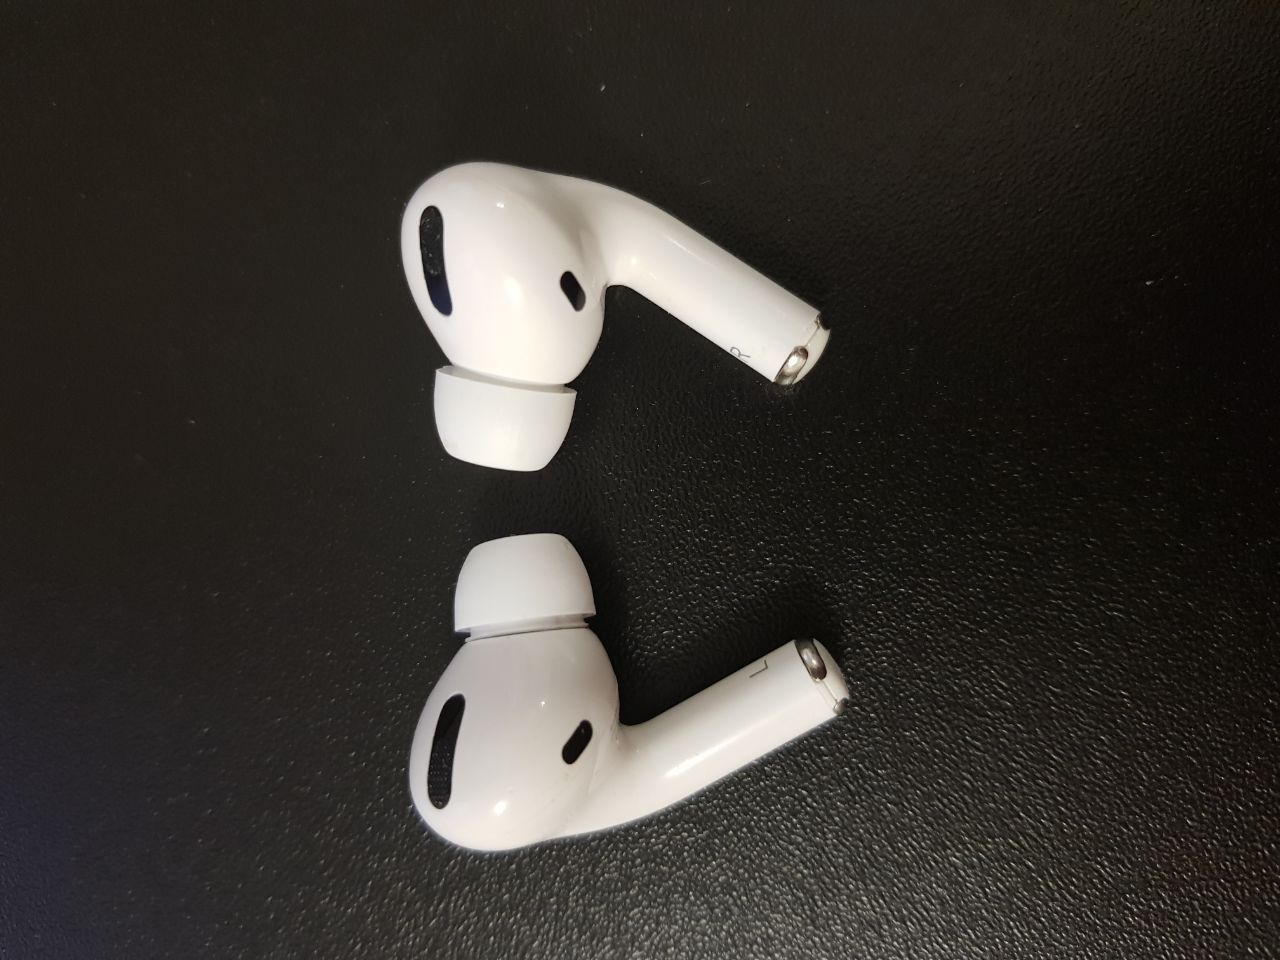 Airpods pro 1|1 luxe